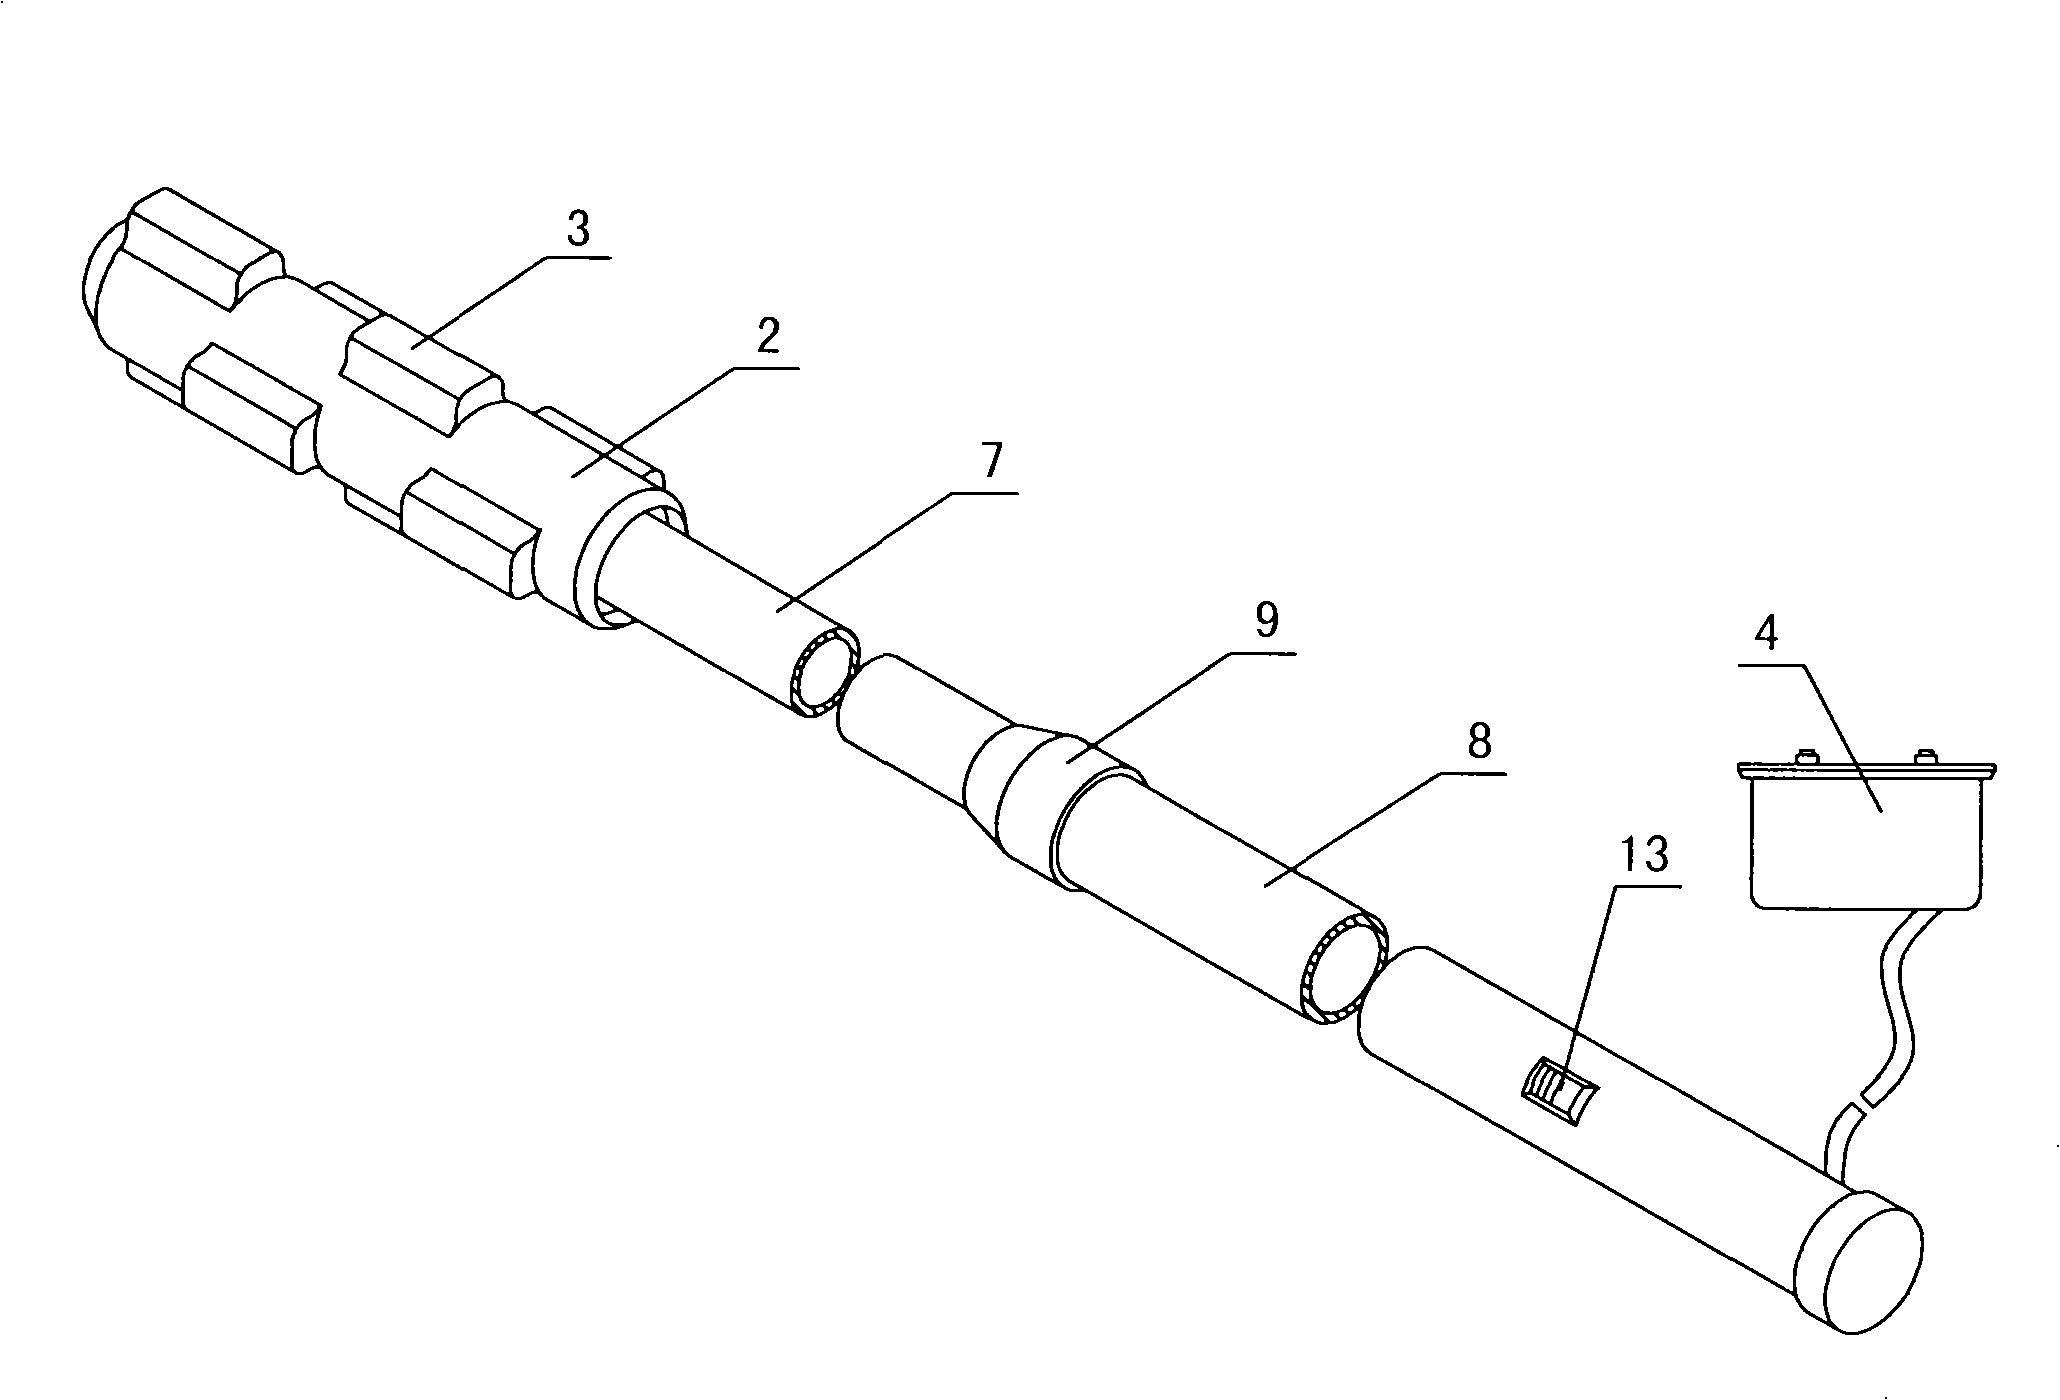 Device for picking fruit